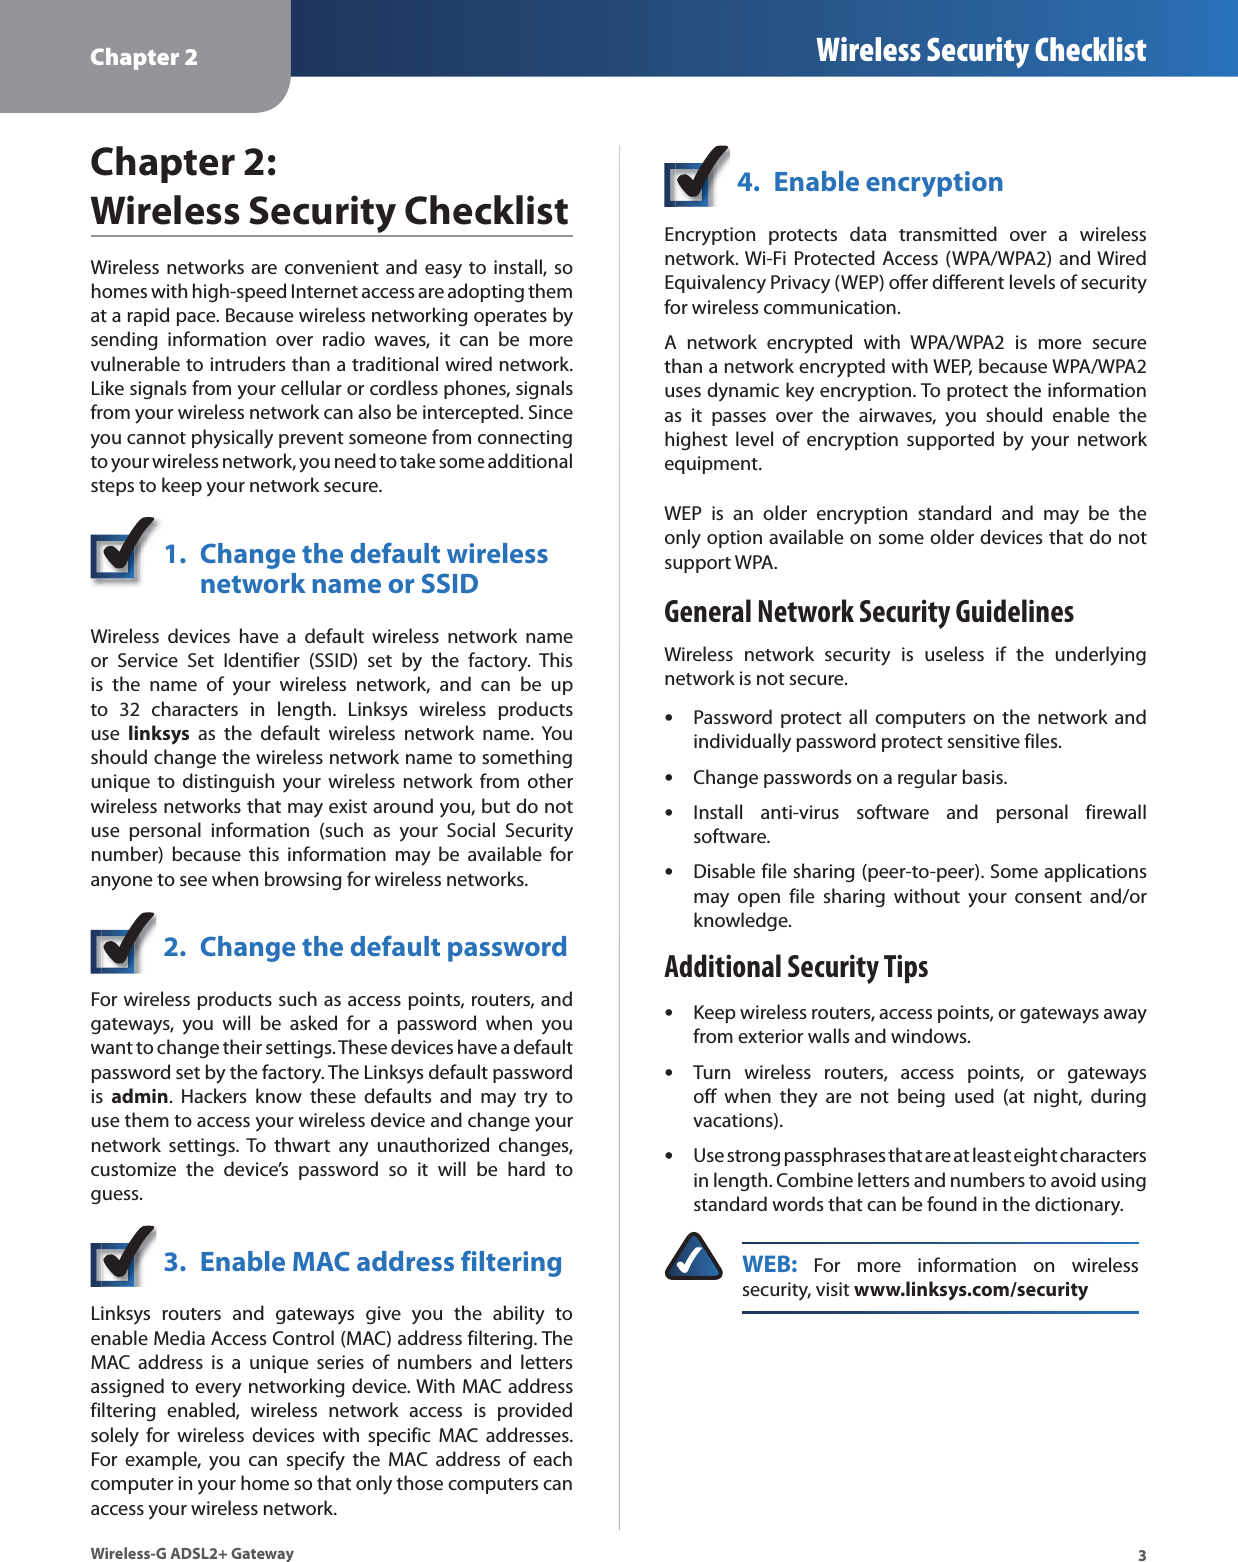 Chapter 2 Wireless Security Checklist3Wireless-G ADSL2+ GatewayChapter 2:  Wireless Security ChecklistWireless networks are convenient and easy to install, so homes with high-speed Internet access are adopting them at a rapid pace. Because wireless networking operates by sending information over radio waves, it can be more vulnerable to intruders than a traditional wired network. Like signals from your cellular or cordless phones, signals from your wireless network can also be intercepted. Since you cannot physically prevent someone from connecting to your wireless network, you need to take some additional steps to keep your network secure. 1. Change the default wireless network name or SSIDWireless devices have a default wireless network name or Service Set Identifier (SSID) set by the factory. This is the name of your wireless network, and can be up to 32 characters in length. Linksys wireless products use linksys as the default wireless network name. You should change the wireless network name to something unique to distinguish your wireless network from other wireless networks that may exist around you, but do not use personal information (such as your Social Security number) because this information may be available for anyone to see when browsing for wireless networks. 2. Change the default passwordFor wireless products such as access points, routers, and gateways, you will be asked for a password when you want to change their settings. These devices have a default password set by the factory. The Linksys default password is admin. Hackers know these defaults and may try to use them to access your wireless device and change your network settings. To thwart any unauthorized changes, customize the device’s password so it will be hard to guess.3. Enable MAC address filteringLinksys routers and gateways give you the ability to enable Media Access Control (MAC) address filtering. The MAC address is a unique series of numbers and letters assigned to every networking device. With MAC address filtering enabled, wireless network access is provided solely for wireless devices with specific MAC addresses. For example, you can specify the MAC address of each computer in your home so that only those computers can access your wireless network. 4. Enable encryptionEncryption protects data transmitted over a wireless network. Wi-Fi Protected Access (WPA/WPA2) and Wired Equivalency Privacy (WEP) offer different levels of security for wireless communication.A network encrypted with WPA/WPA2 is more secure than a network encrypted with WEP, because WPA/WPA2 uses dynamic key encryption. To protect the information as it passes over the airwaves, you should enable the highest level of encryption supported by your network equipment. WEP is an older encryption standard and may be the only option available on some older devices that do not support WPA.General Network Security GuidelinesWireless network security is useless if the underlying network is not secure. Password protect all computers on the network and sindividually password protect sensitive files.Change passwords on a regular basis.sInstall anti-virus software and personal firewall ssoftware.Disable file sharing (peer-to-peer). Some applications smay open file sharing without your consent and/or knowledge.Additional Security TipsKeep wireless routers, access points, or gateways away sfrom exterior walls and windows.Turn wireless routers, access points, or gateways soff when they are not being used (at night, during vacations).Use strong passphrases that are at least eight characters sin length. Combine letters and numbers to avoid using standard words that can be found in the dictionary. WEB: For more information on wireless security, visit www.linksys.com/security